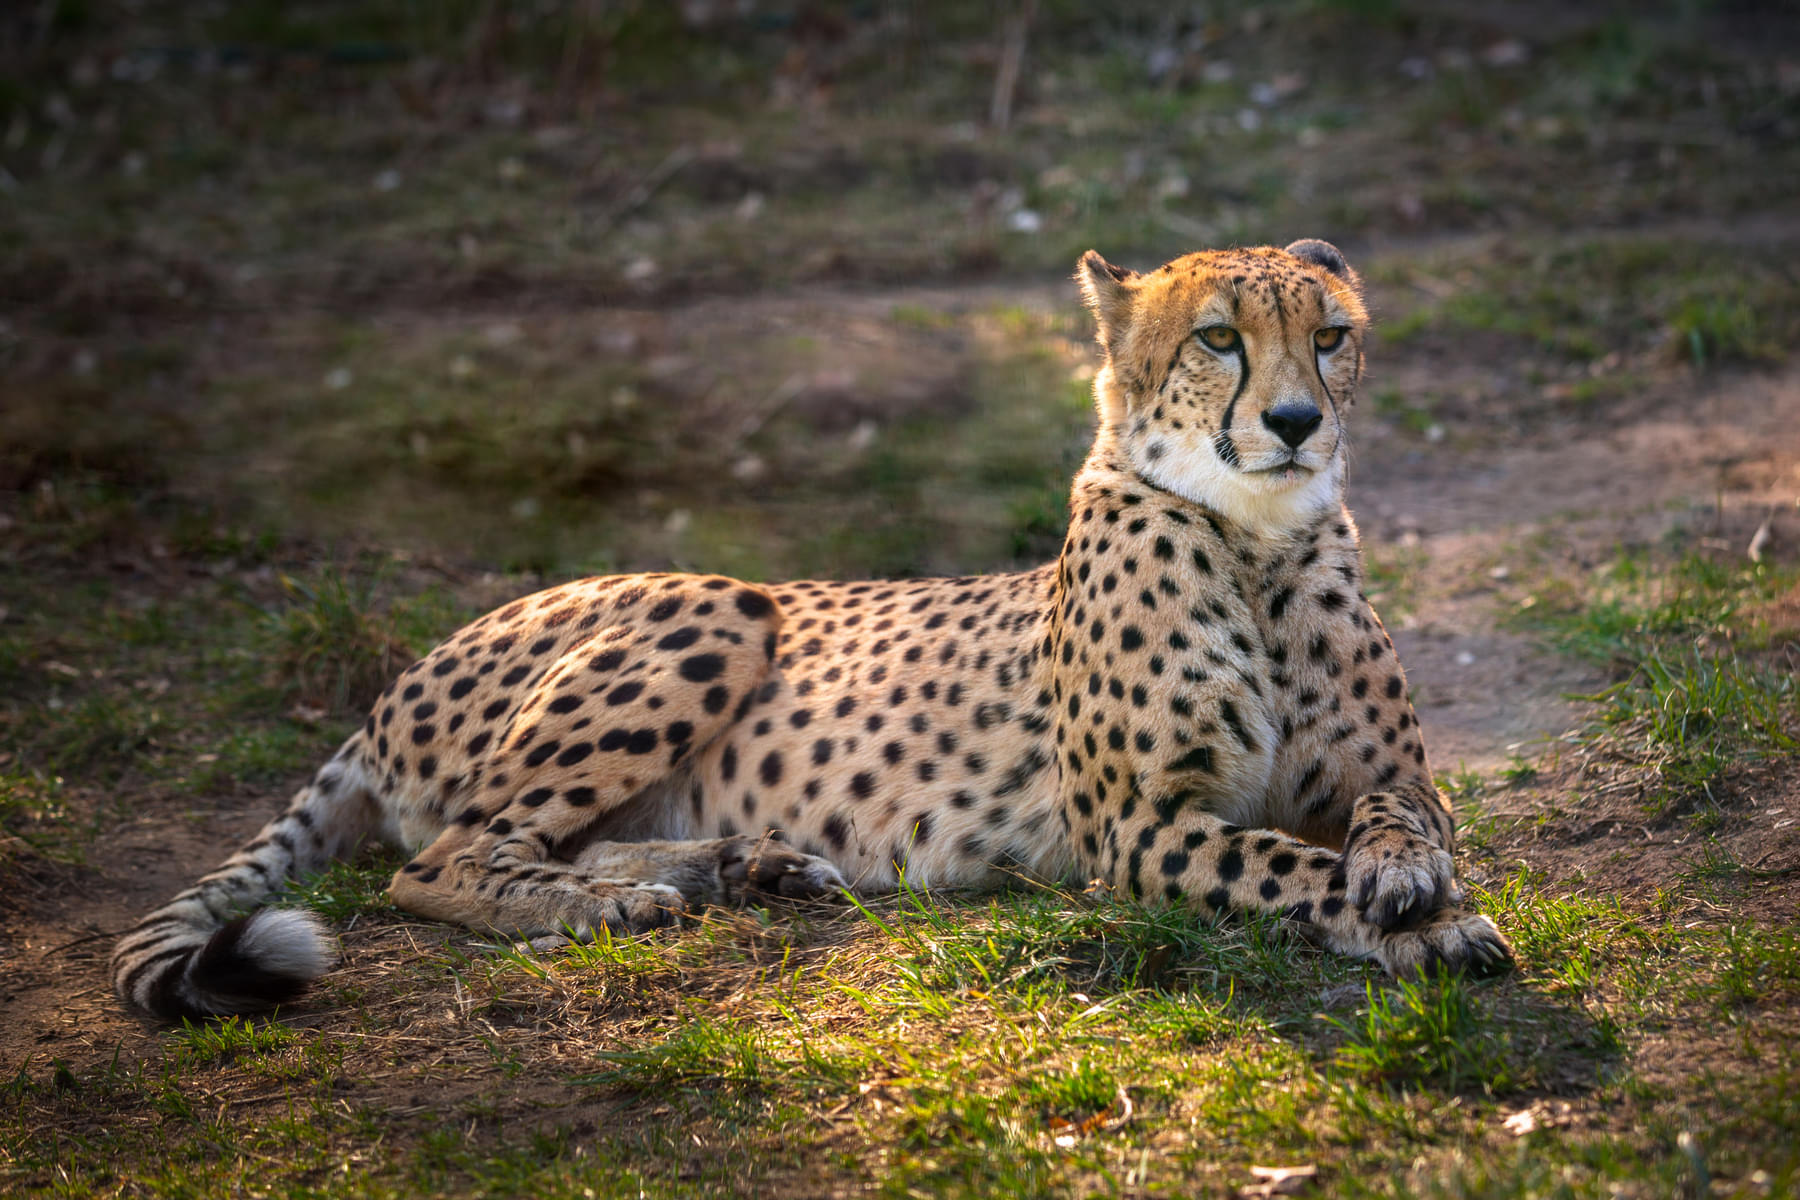 Interact with cheetah the fastest mammal on land